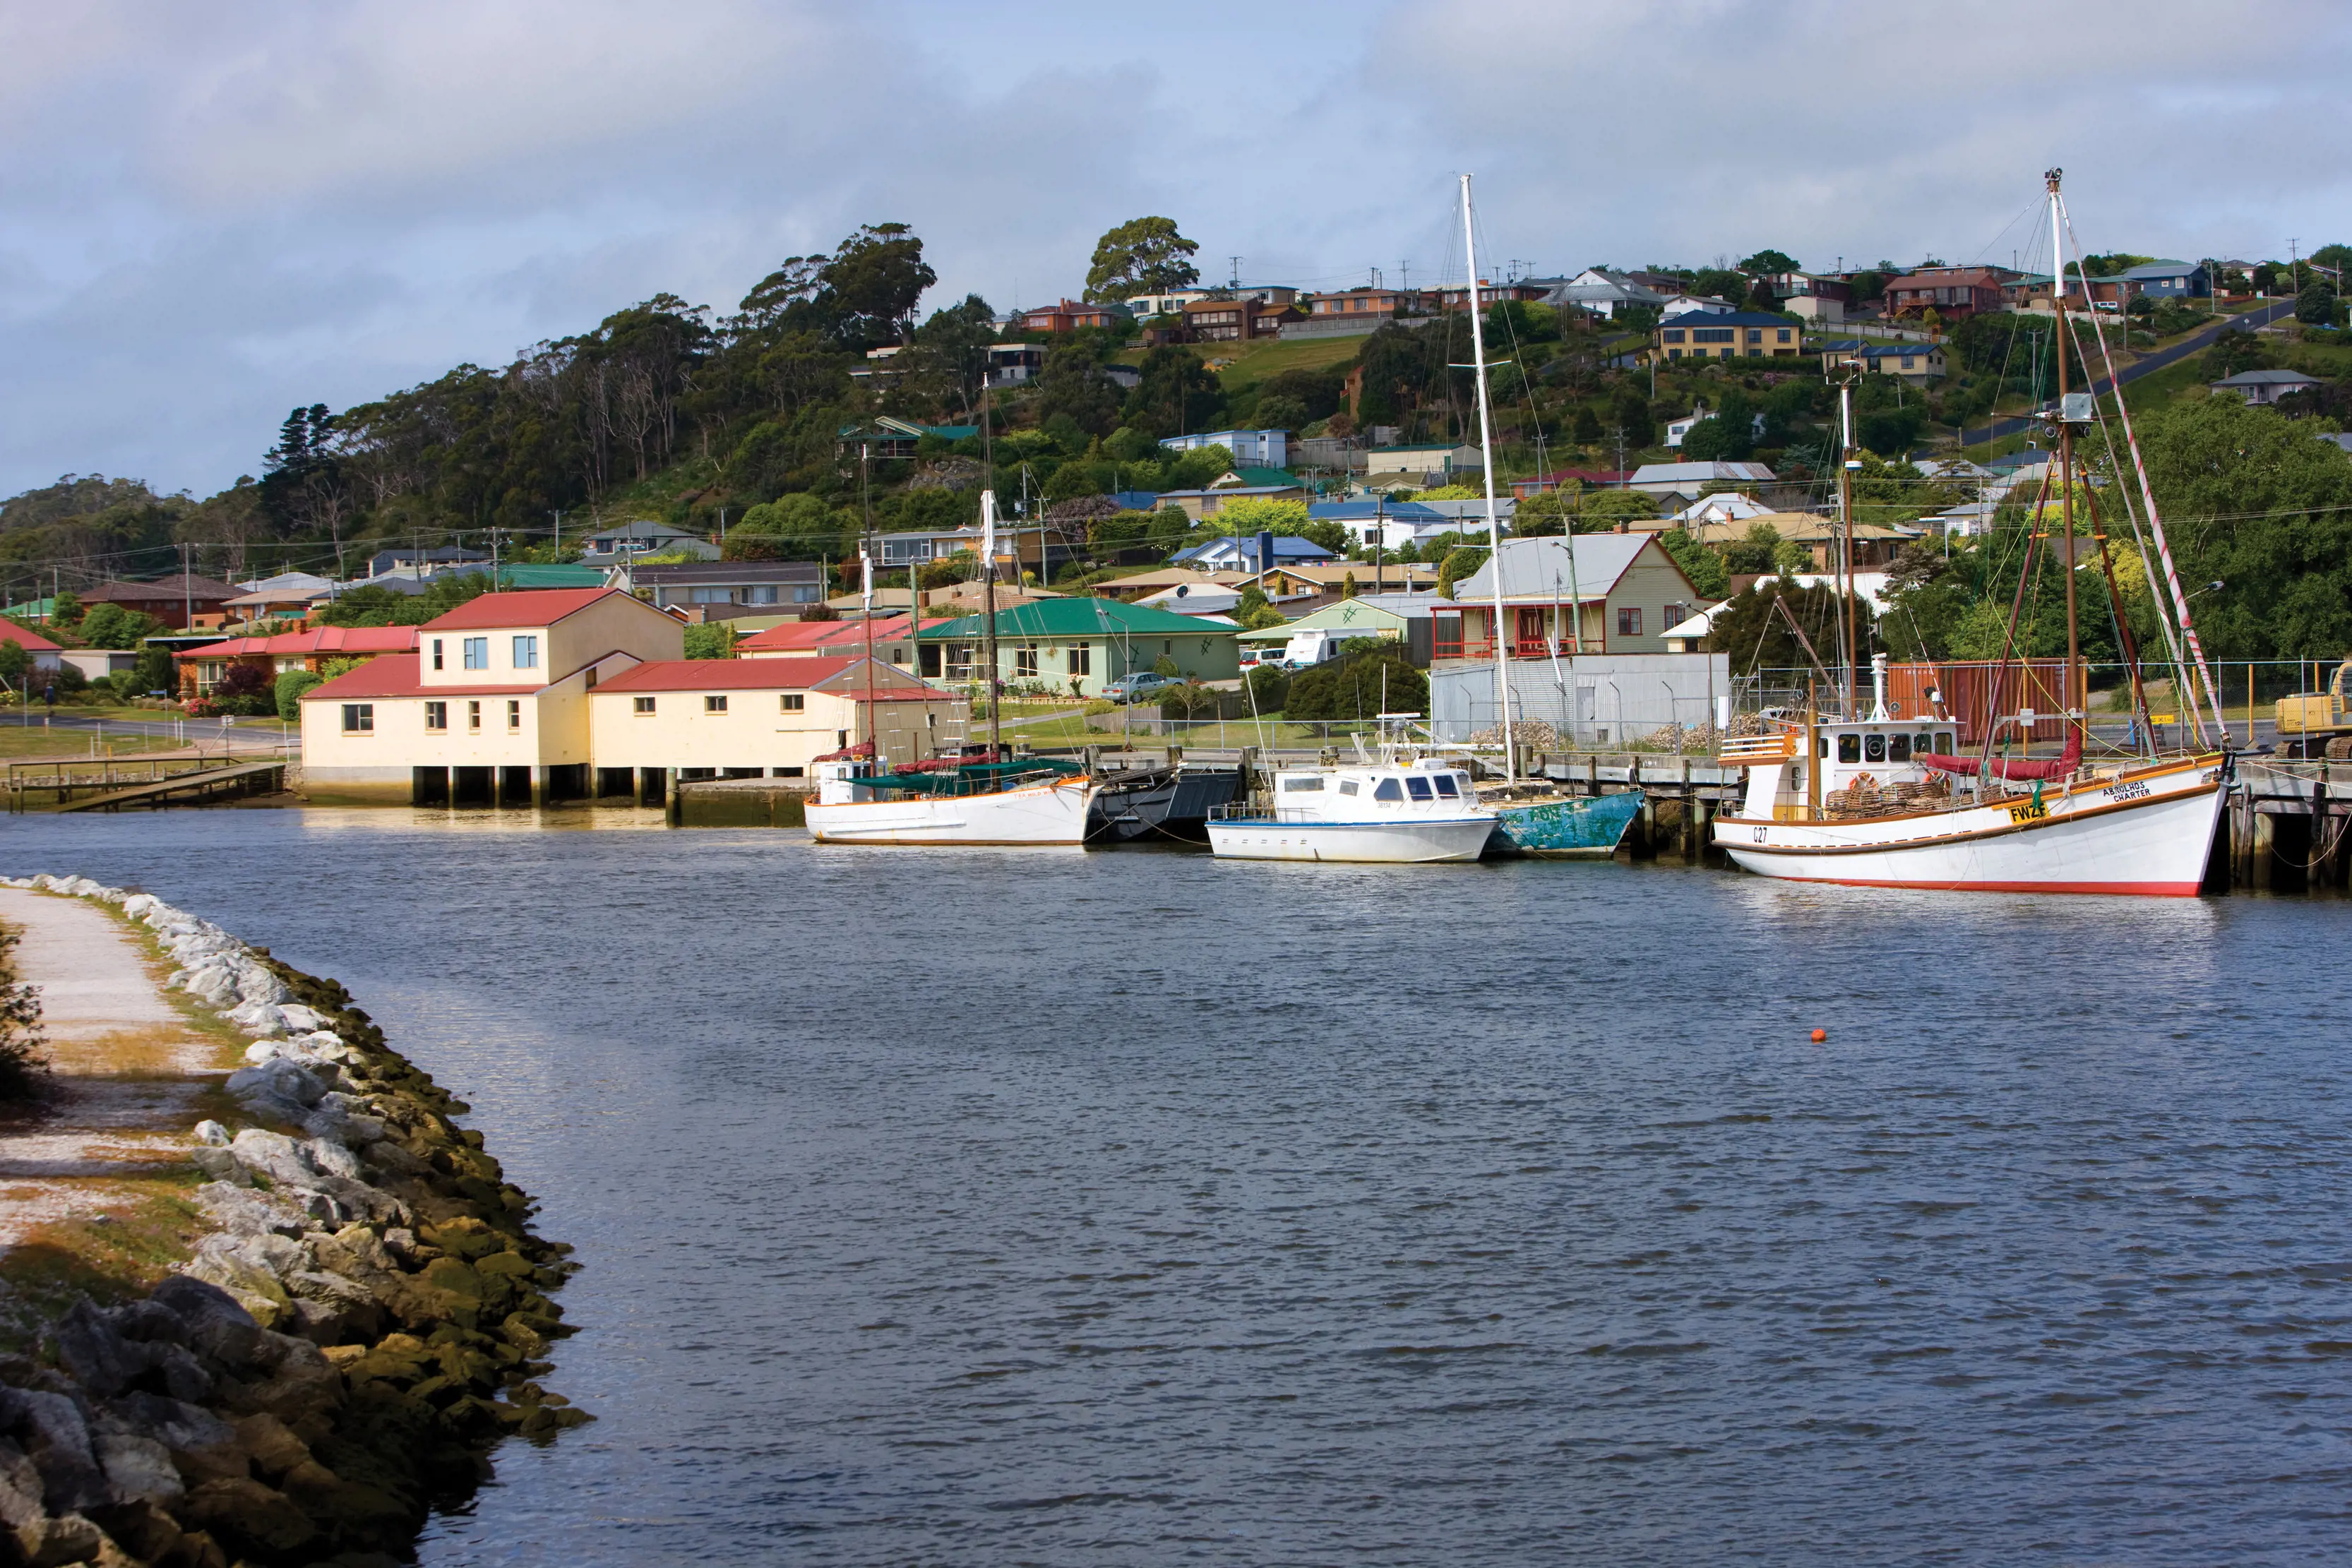 Duck River, Smithton, with boats docked at the jetty and buildings fill the background of the image with the river taking up the foreground.